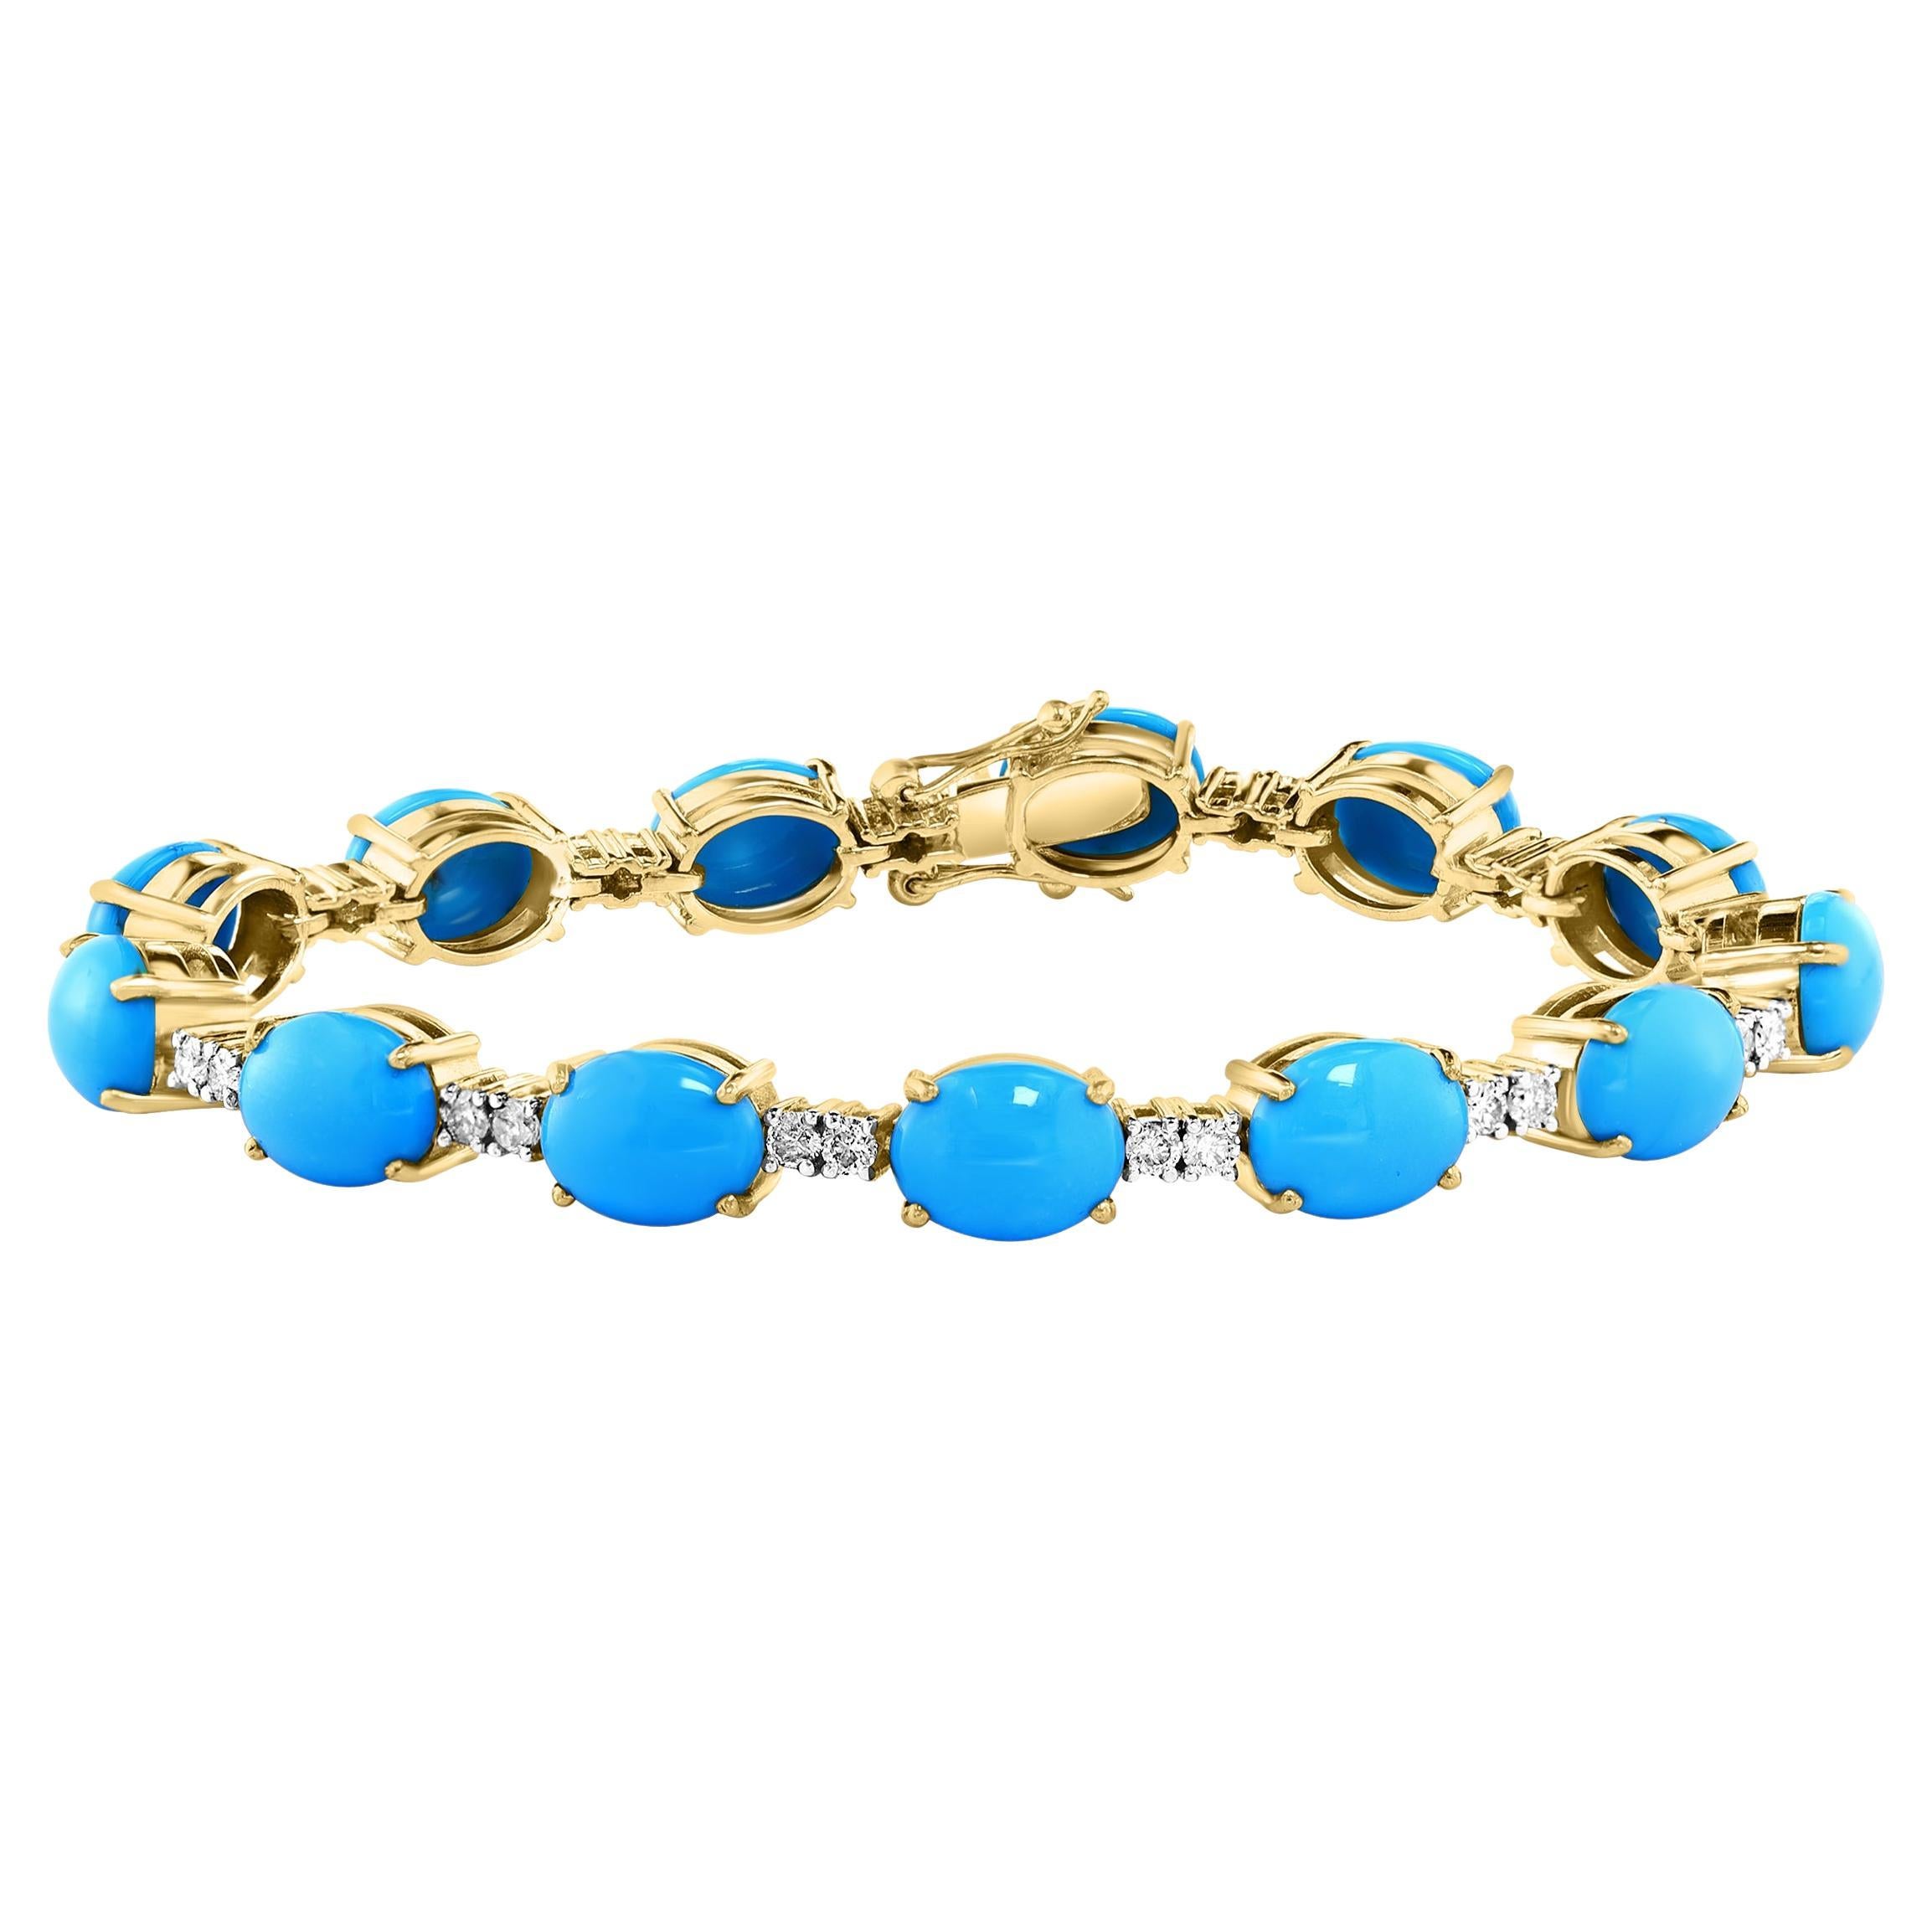 This Rare and Classic Natural Sleeping Beauty Turquoise & Diamond Tennis Bracelet is an exceptional piece that is sure to be a cherished addition to any jewelry collection. The bracelet features 13 stones of oval Sleeping Beauty Turquoise, each